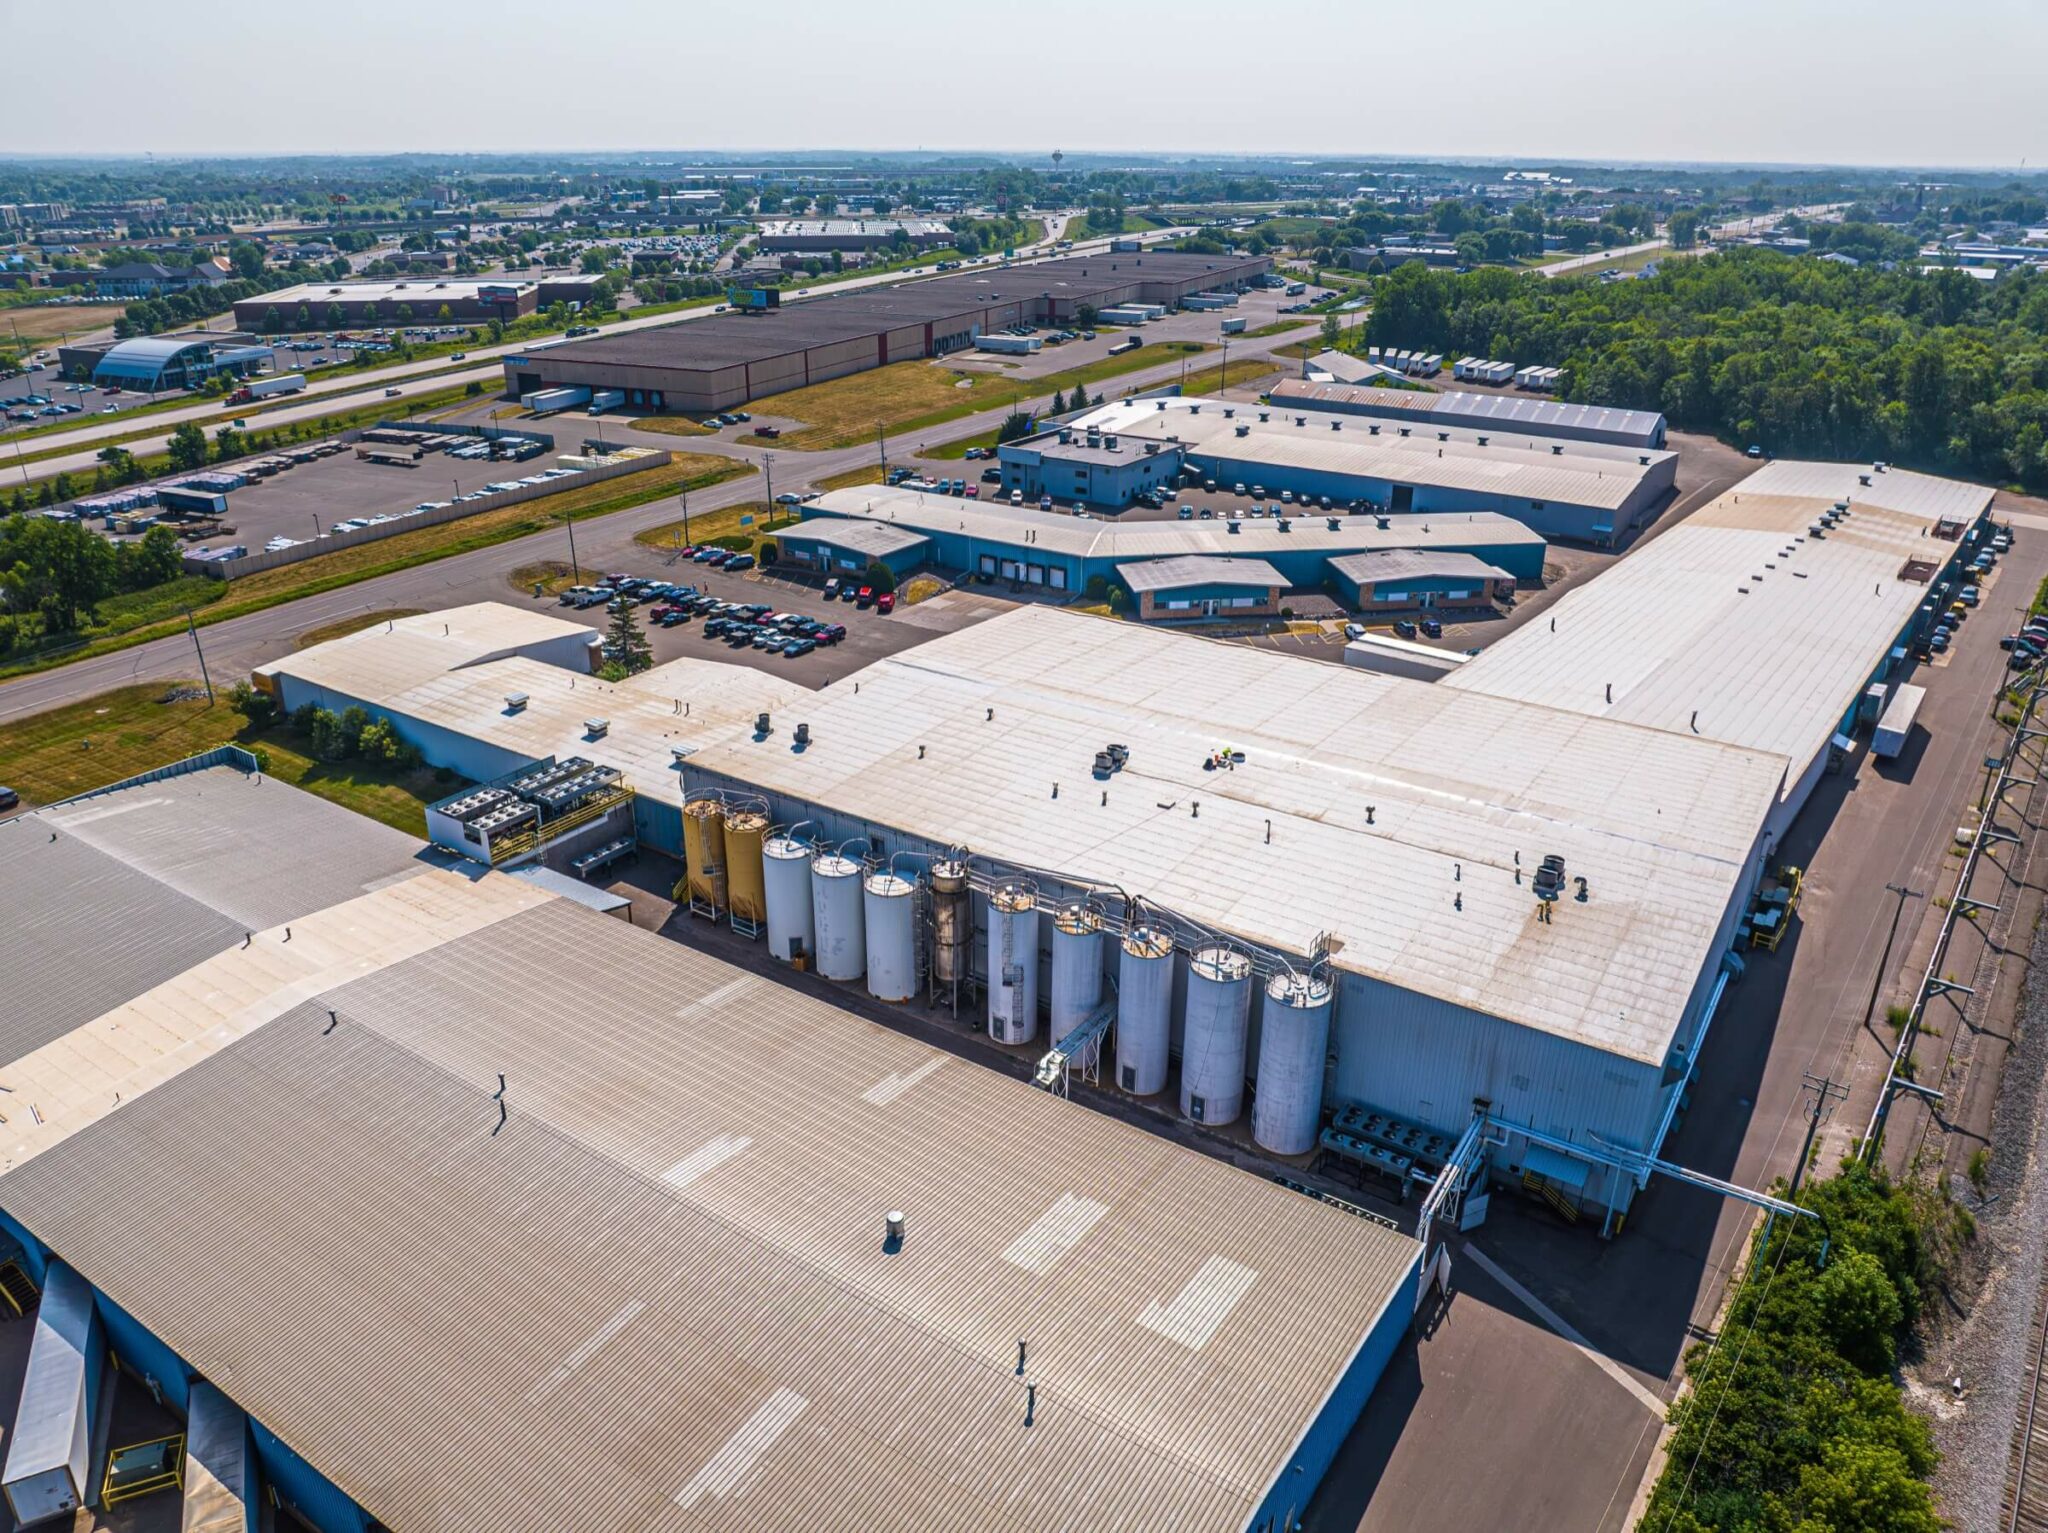 Drone view showing the roofs of an industrial zone